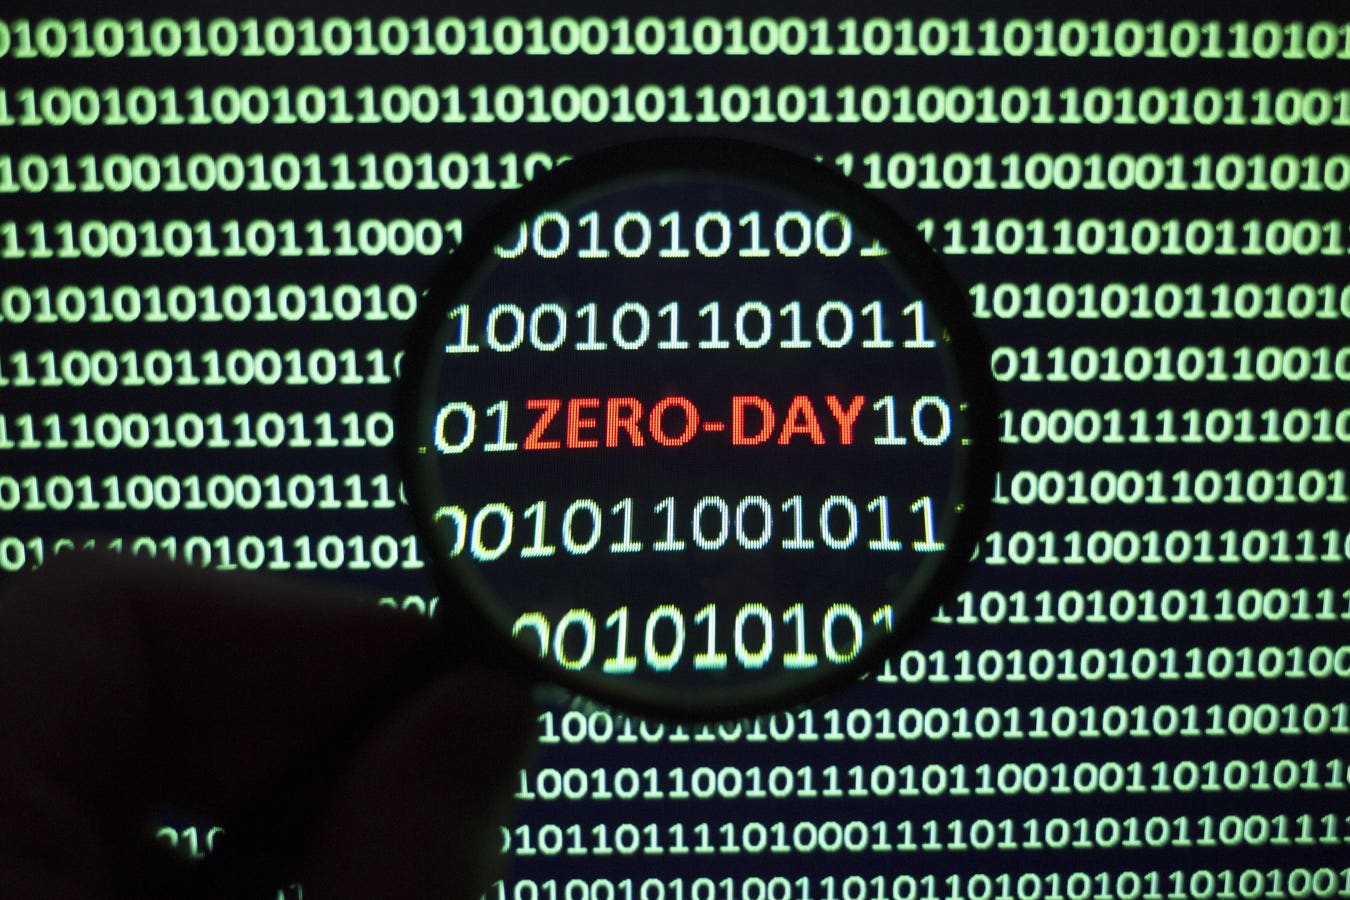 Google Confirms 97 Zero-Day Attacks And Points Finger At China For 12